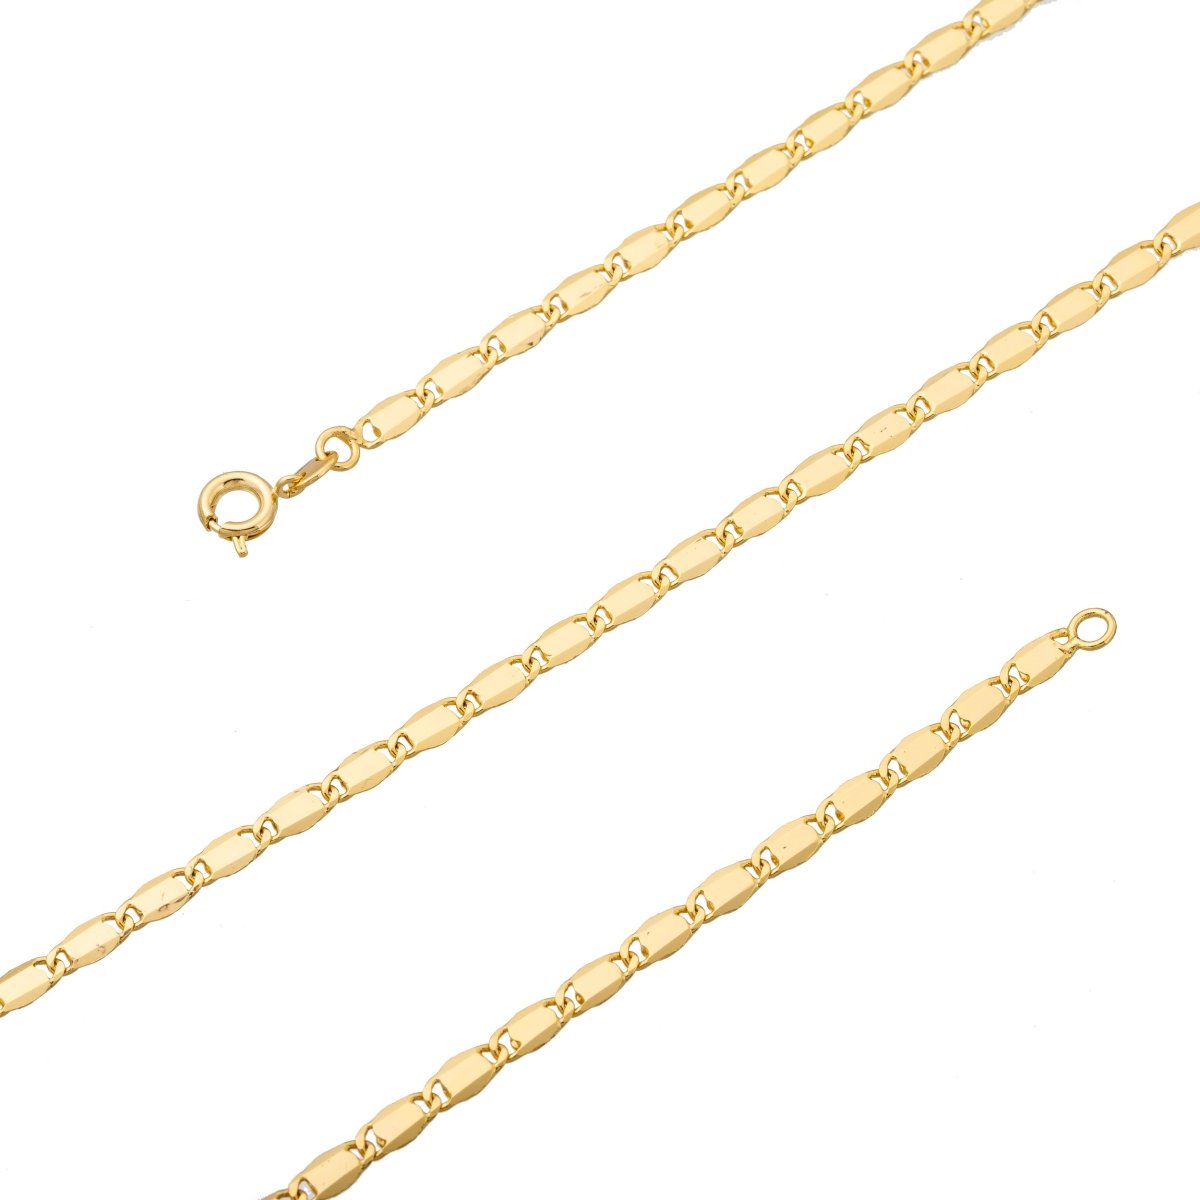 19.5 inch Scroll Chain Necklace, 24K Gold Plated Unique Necklace, Dainty 1.8mm Unique Necklace w/ Spring Ring | CN-167 Clearance Pricing - DLUXCA